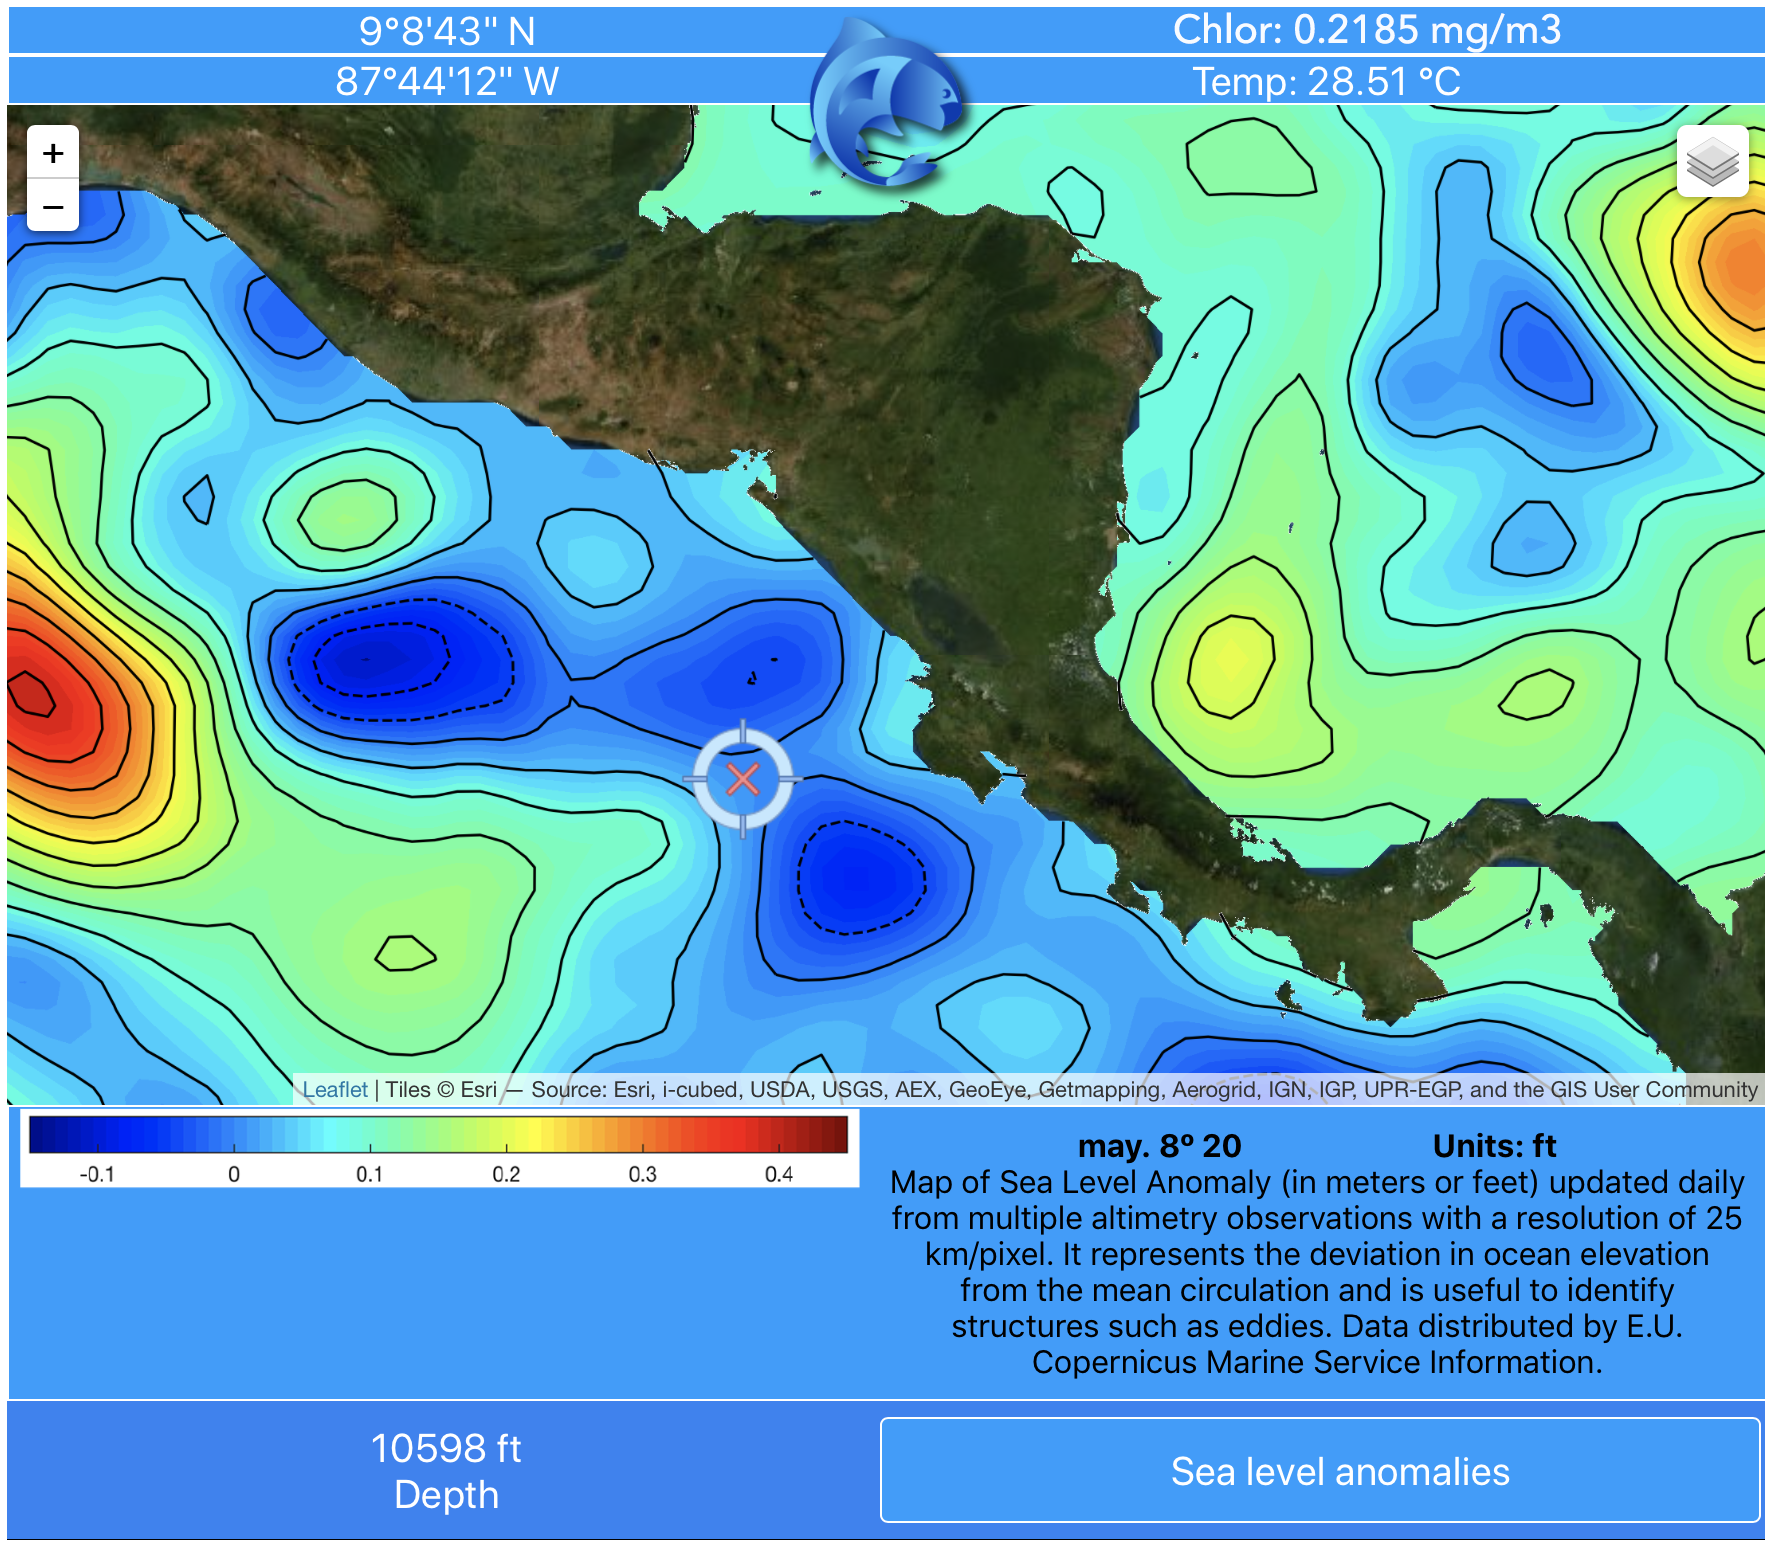 Sea level anomaly data map off Central America from pezCA